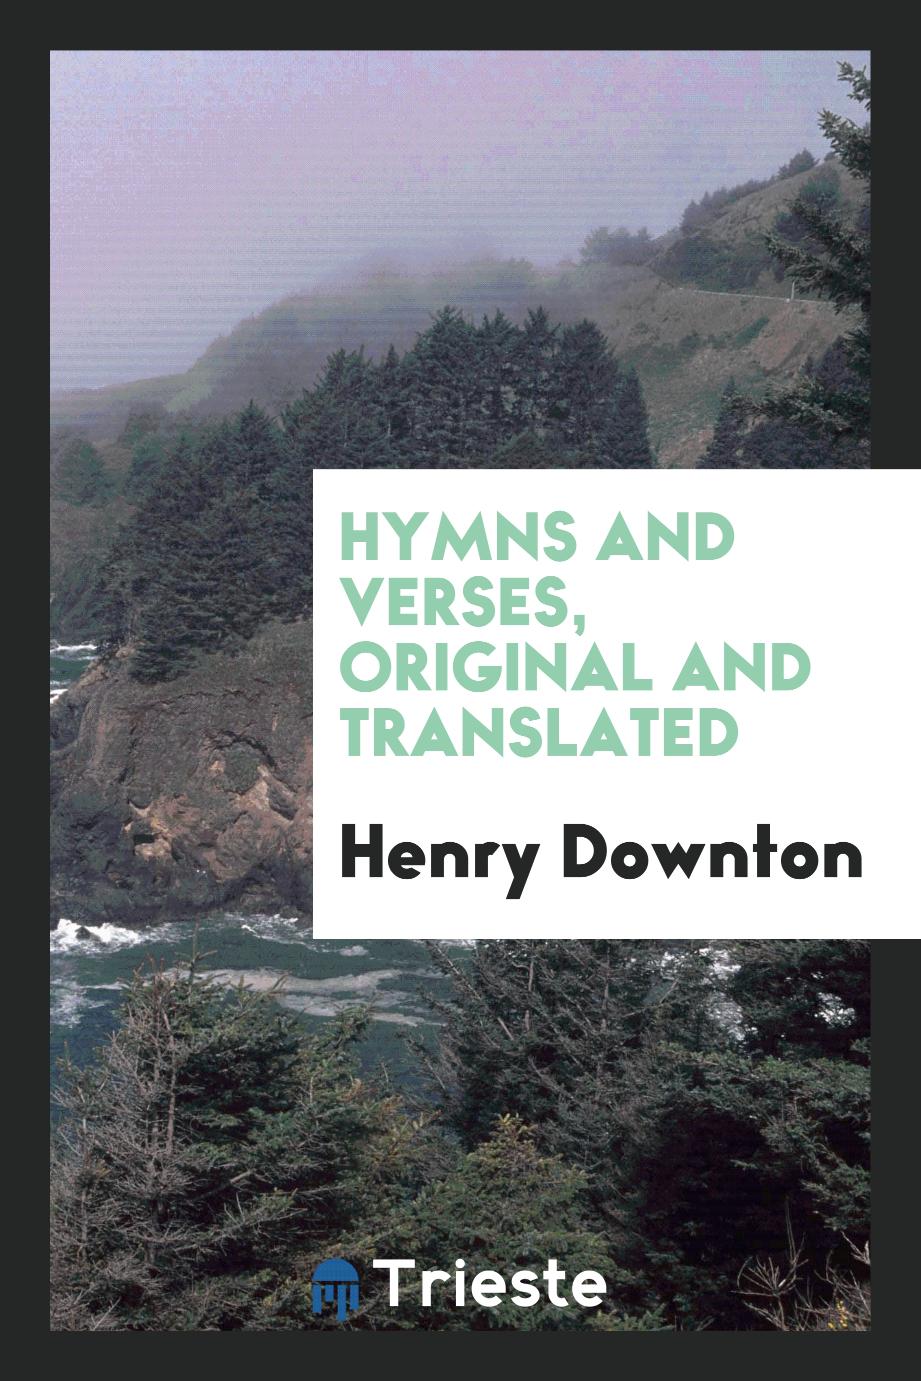 Hymns and Verses, Original and Translated